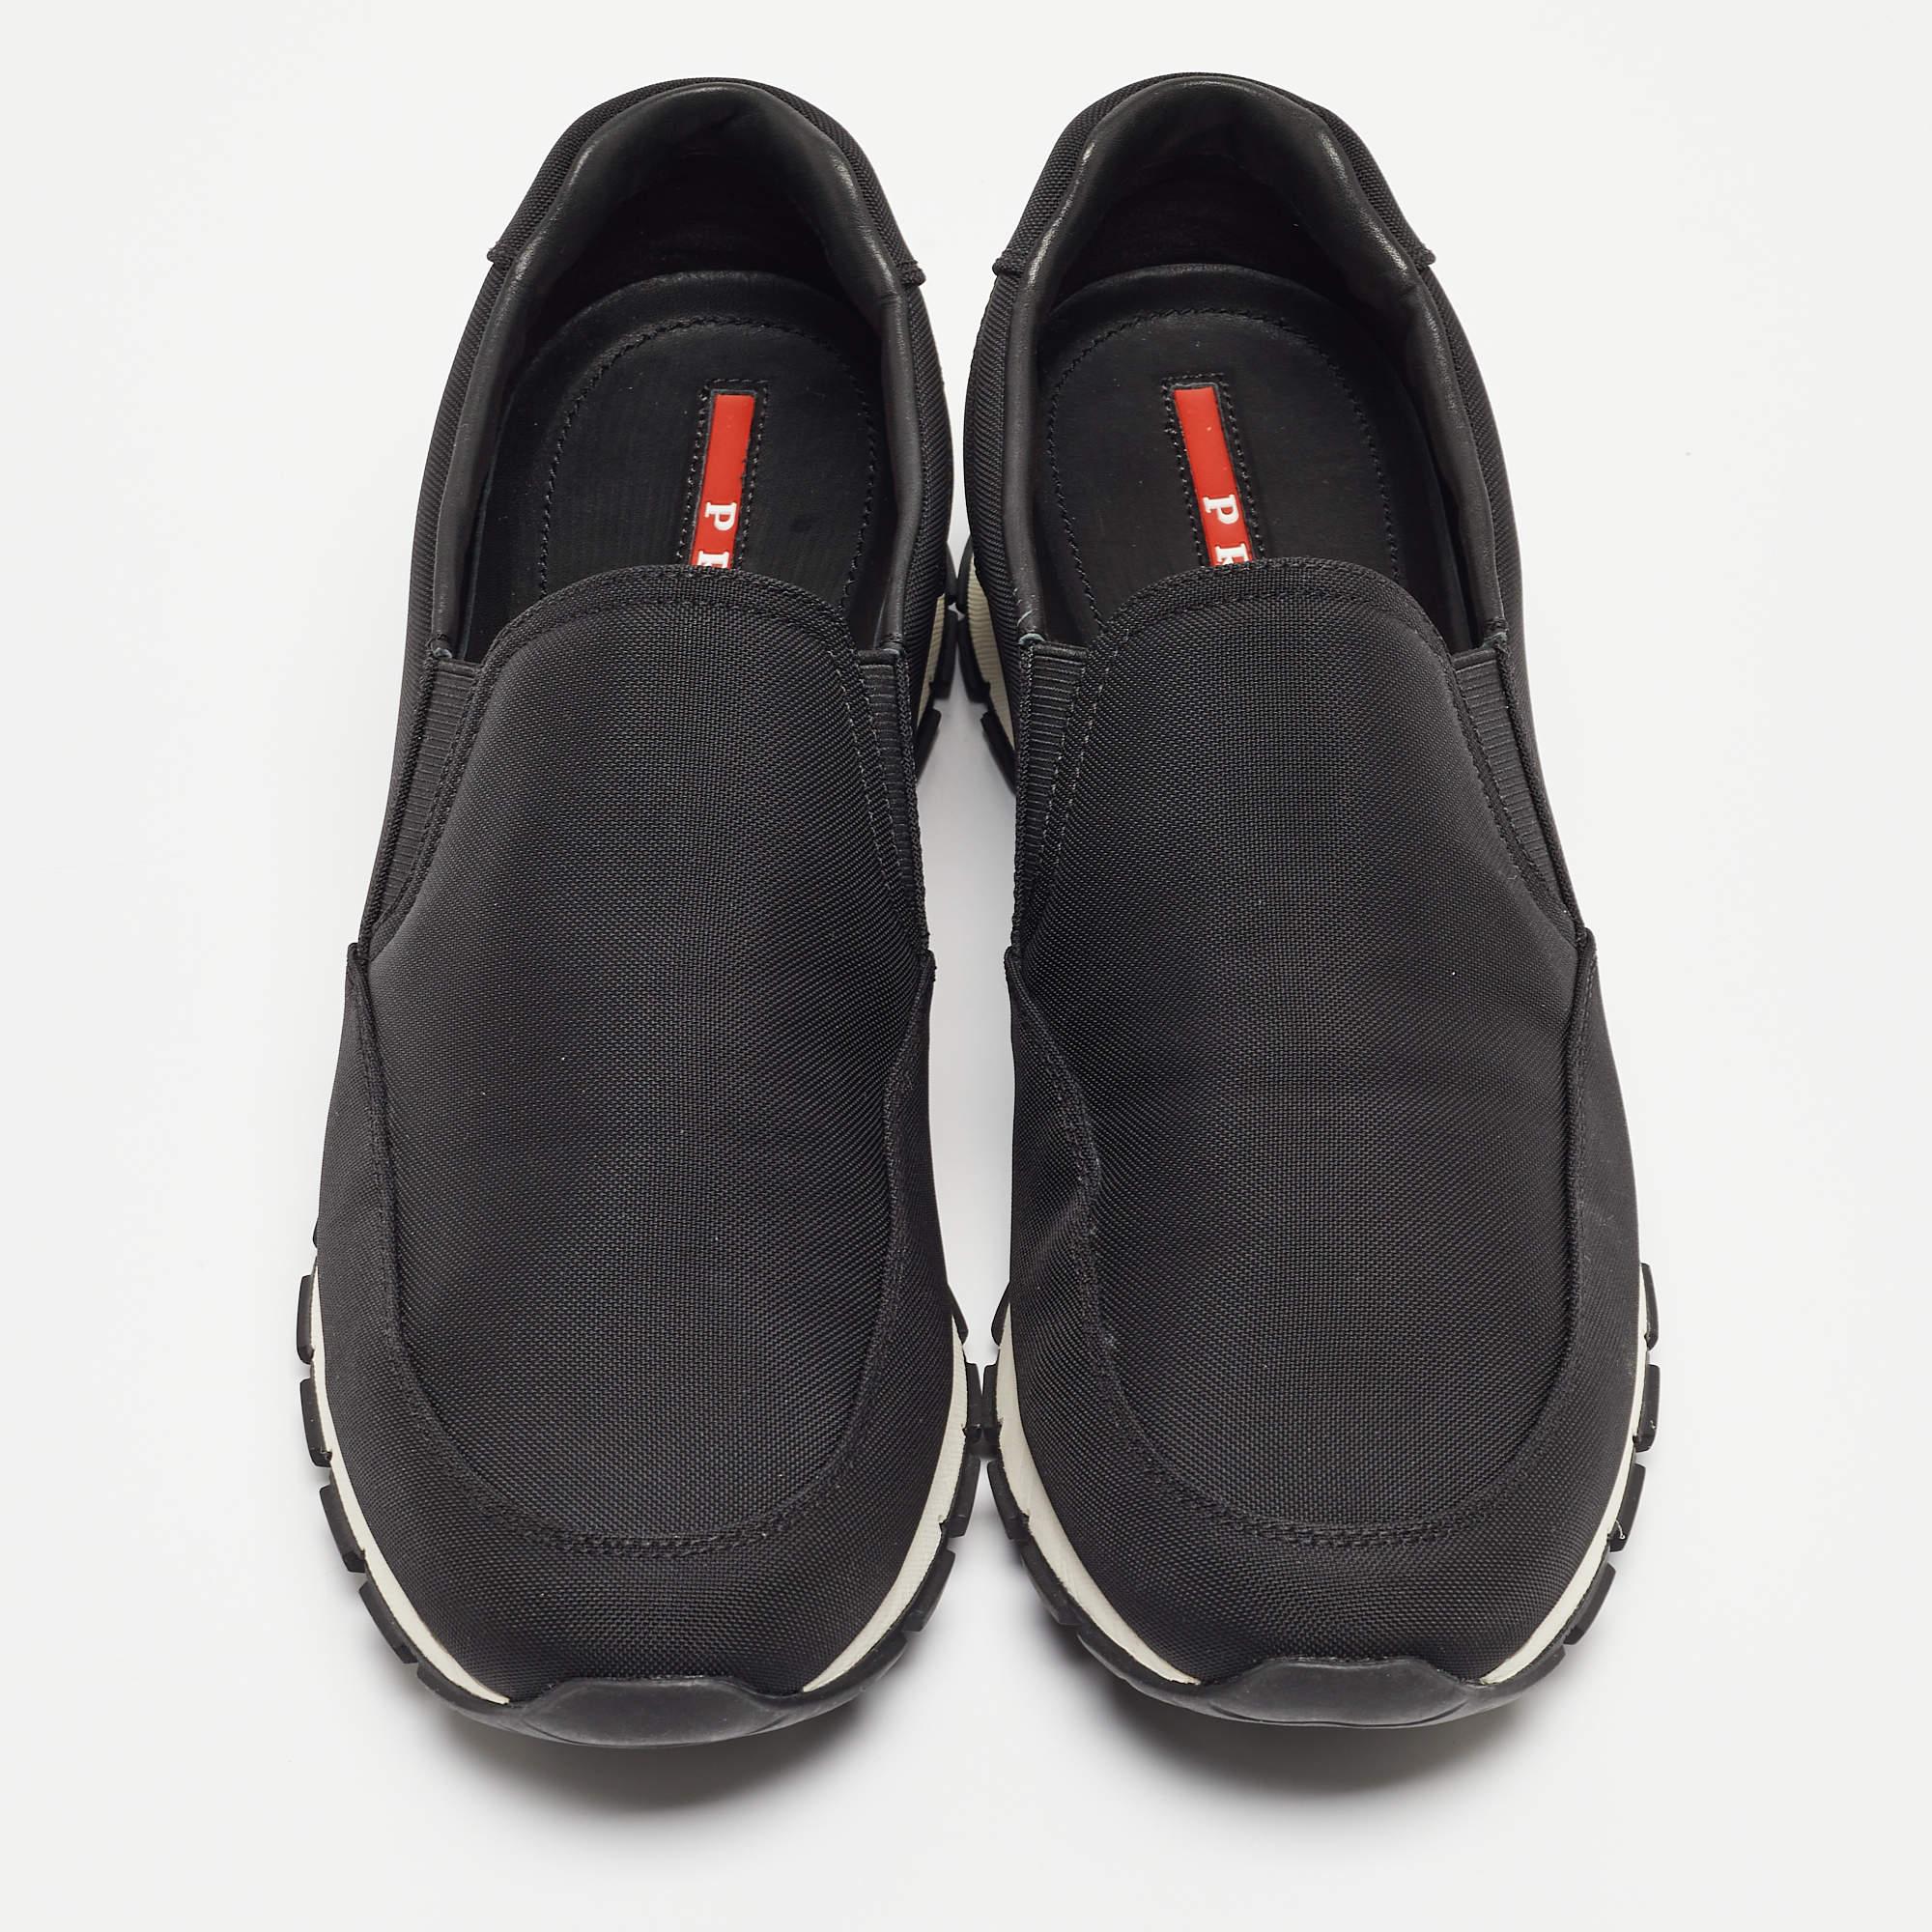 Give your outfit a luxe update with this pair of Prada black sneakers. The creation is sewn perfectly to help you make a statement in them for a long time.

Includes
Original Dustbag